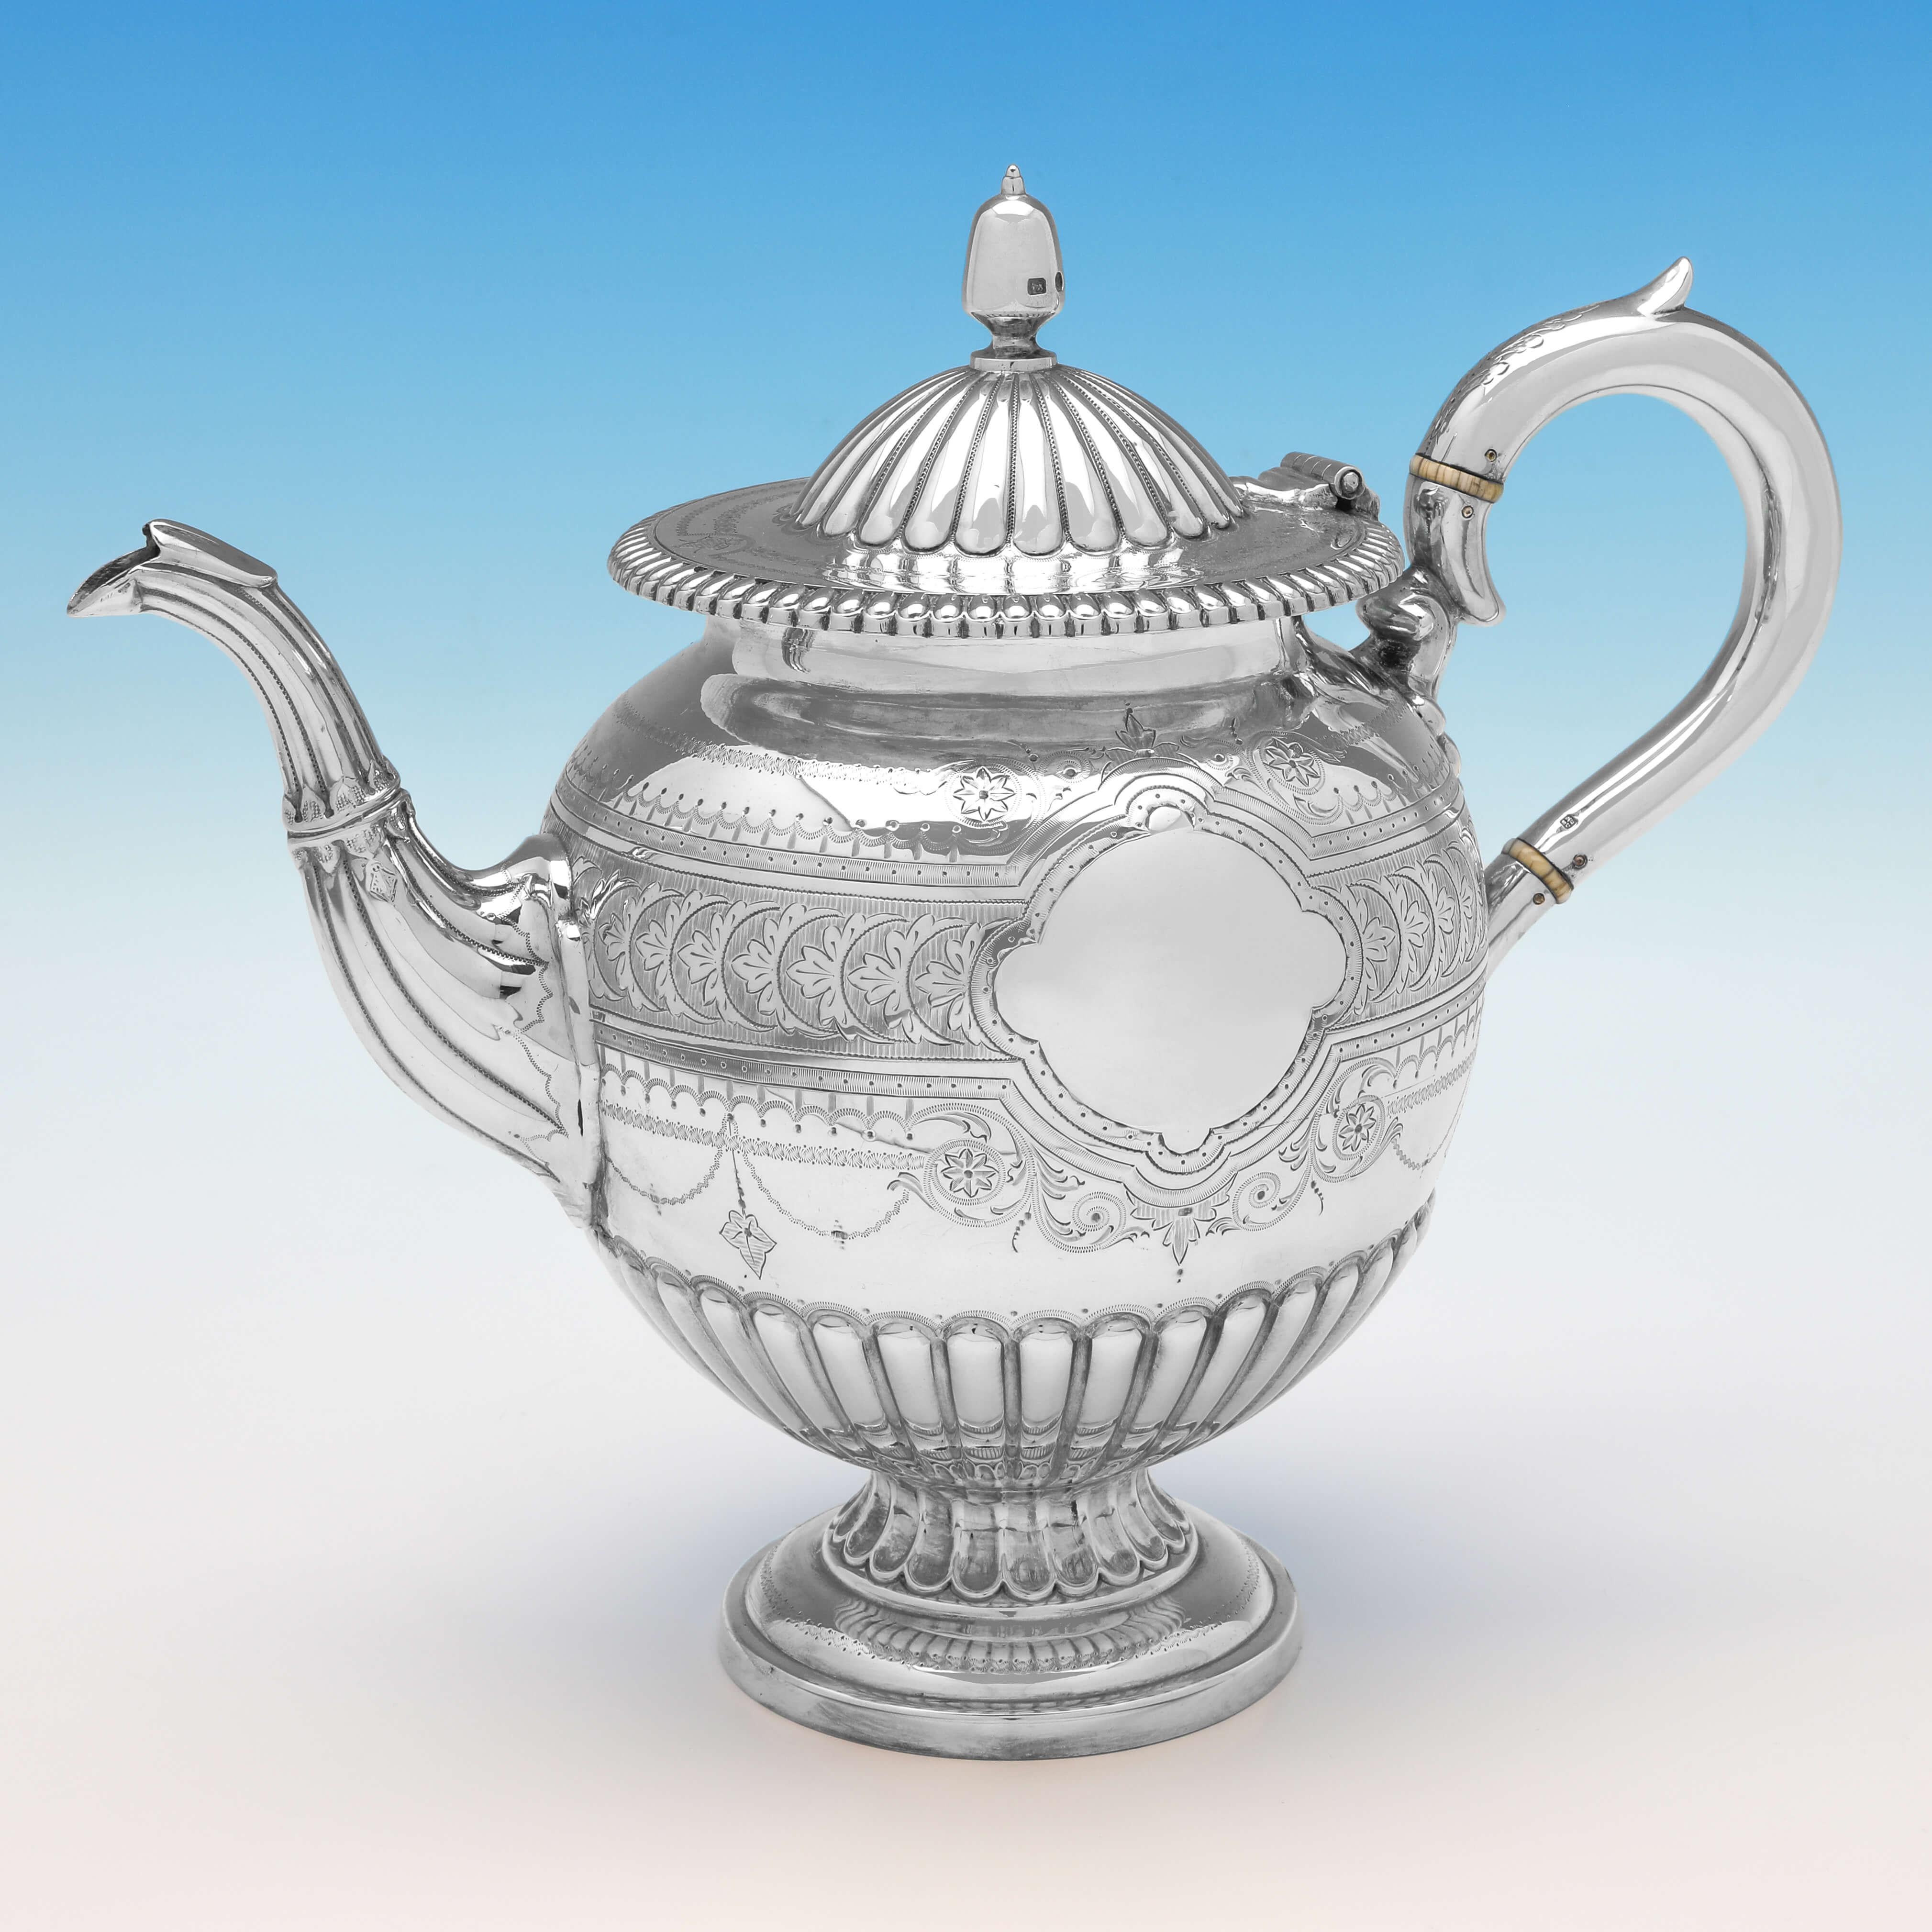 Hallmarked in Sheffield in 1876 by Roberts & Belk, this very attractive, Victorian, Antique Sterling Silver Tea Set, is 'Urn' shaped, and features wonderful engraved decoration throughout. The teapot measures 9.25